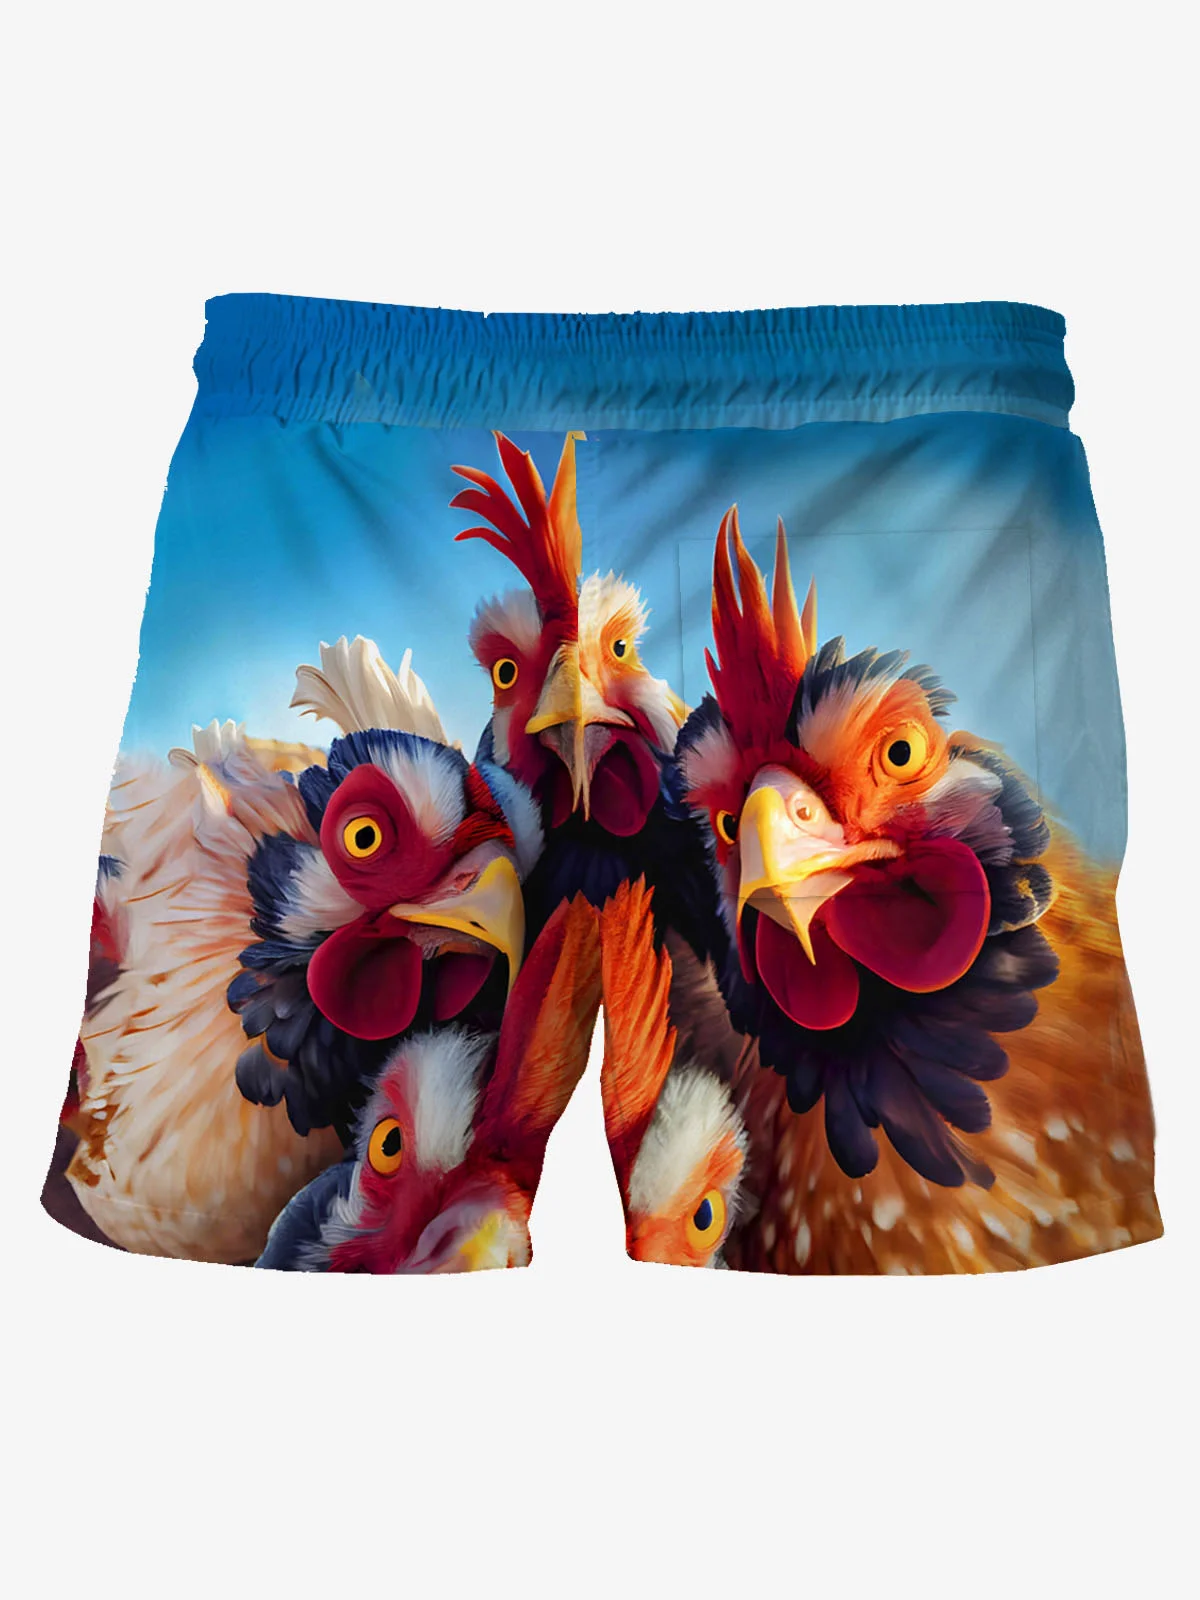 Royaura Vintage Rooster Print Men's Moisture Wicking Quick Dry Swim Trunks Board Shorts